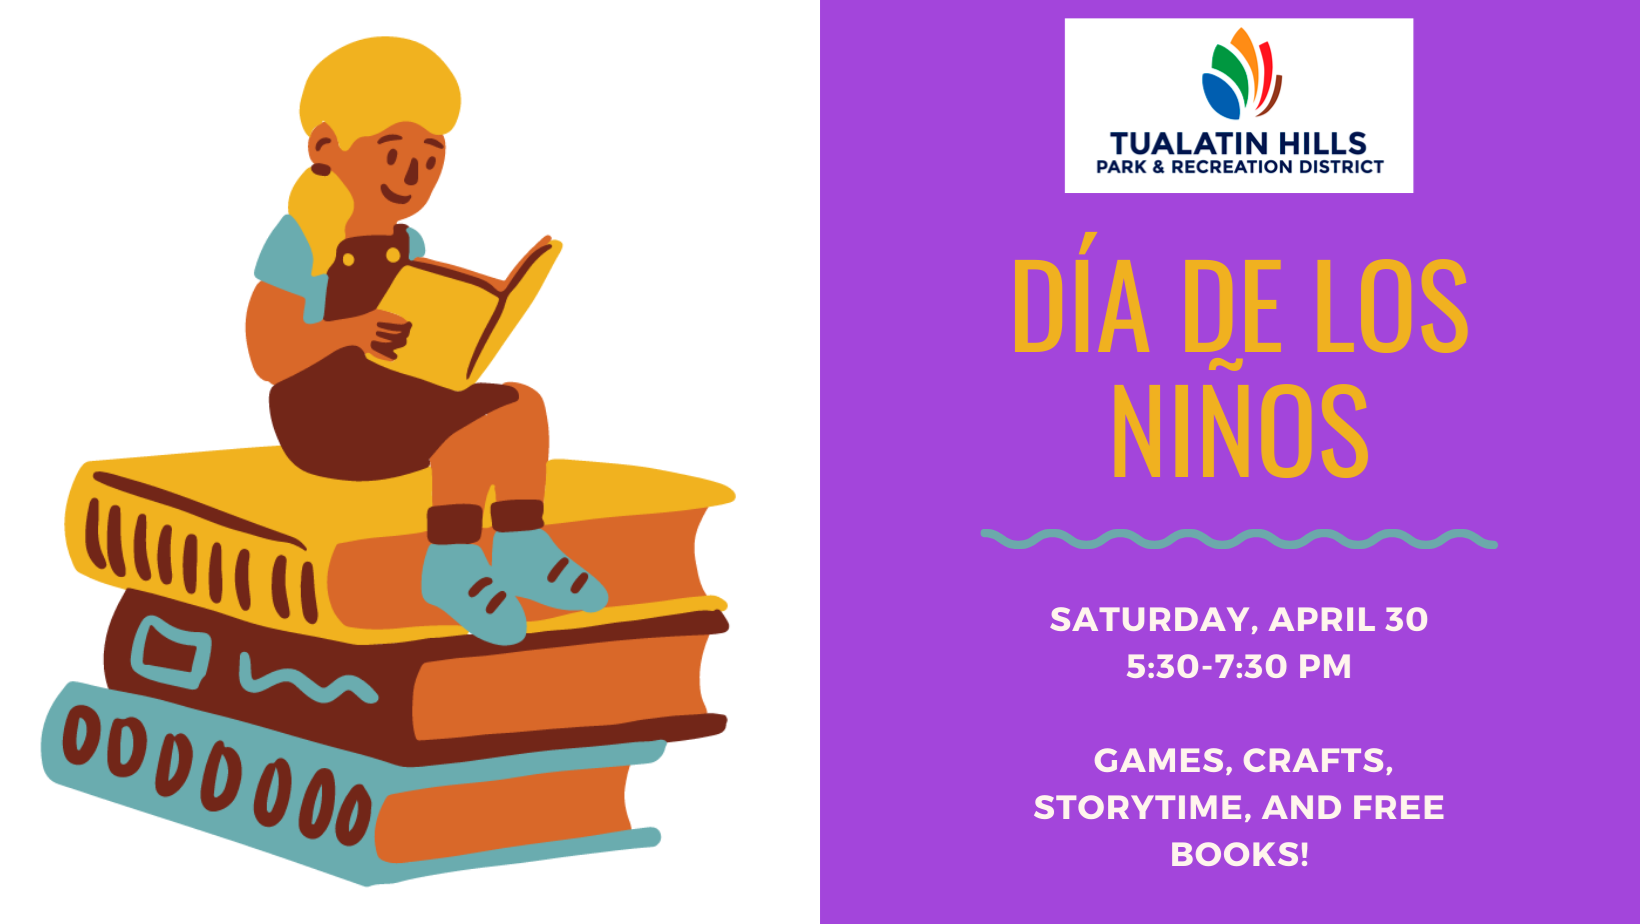 Image with girl reading book & date and time for THPRD's Dia de Los Ninos event